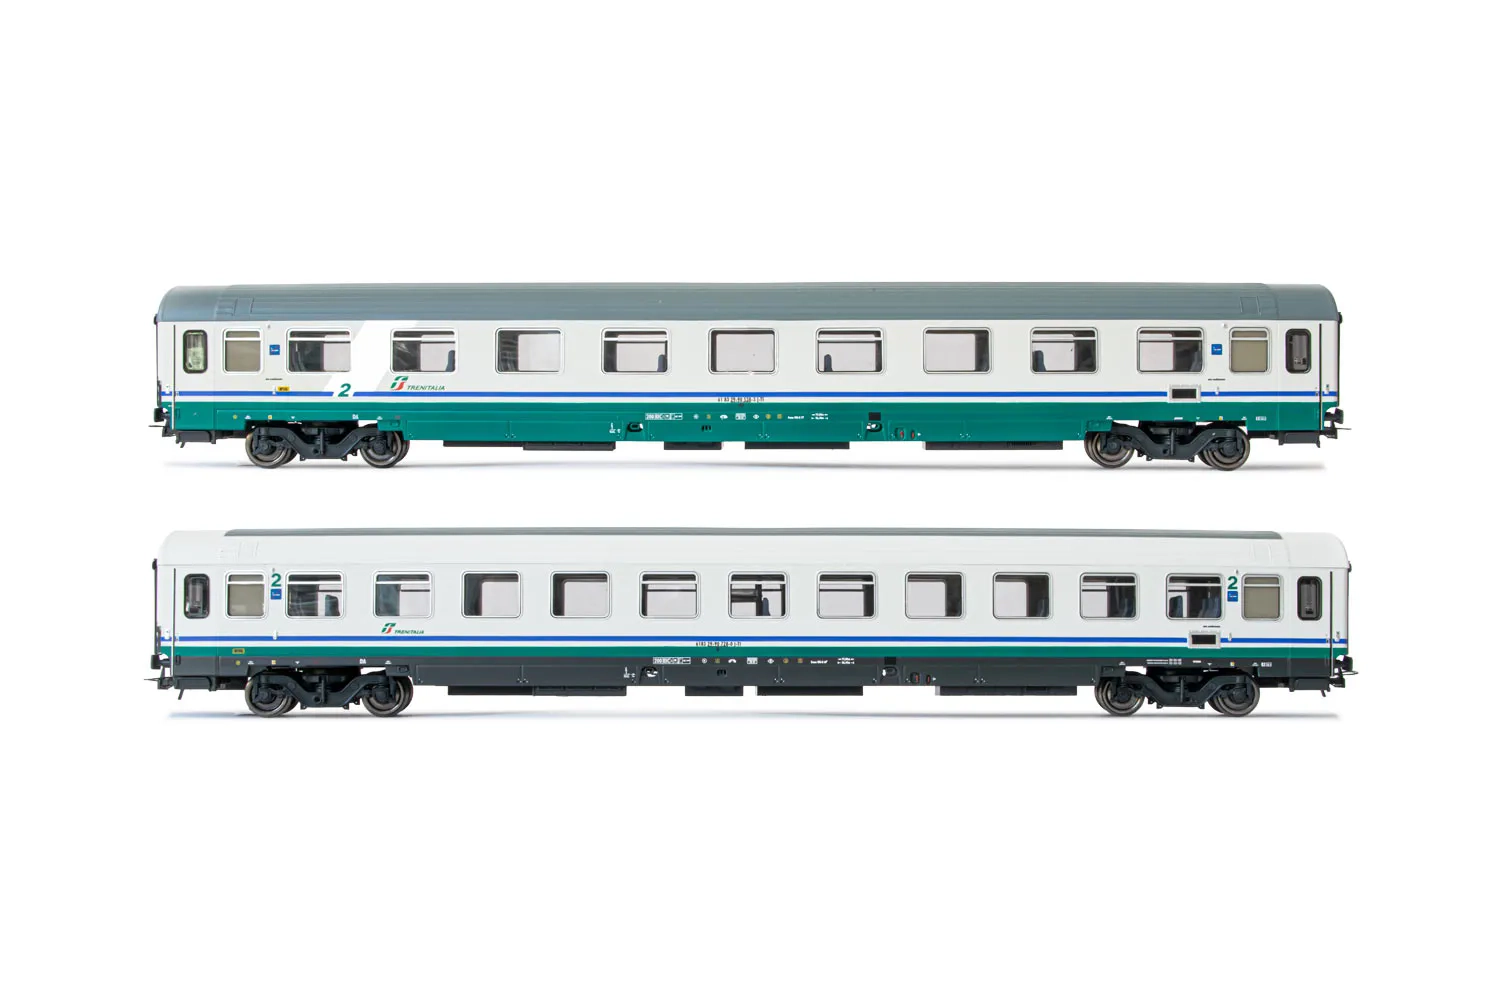 FS, 2-unit pack passenger coaches type UIC-Z renovated (progetto 901/300) in XMPR livery, contains one 2nd class (ex1st class) coach and one 2nd class coach, period VI